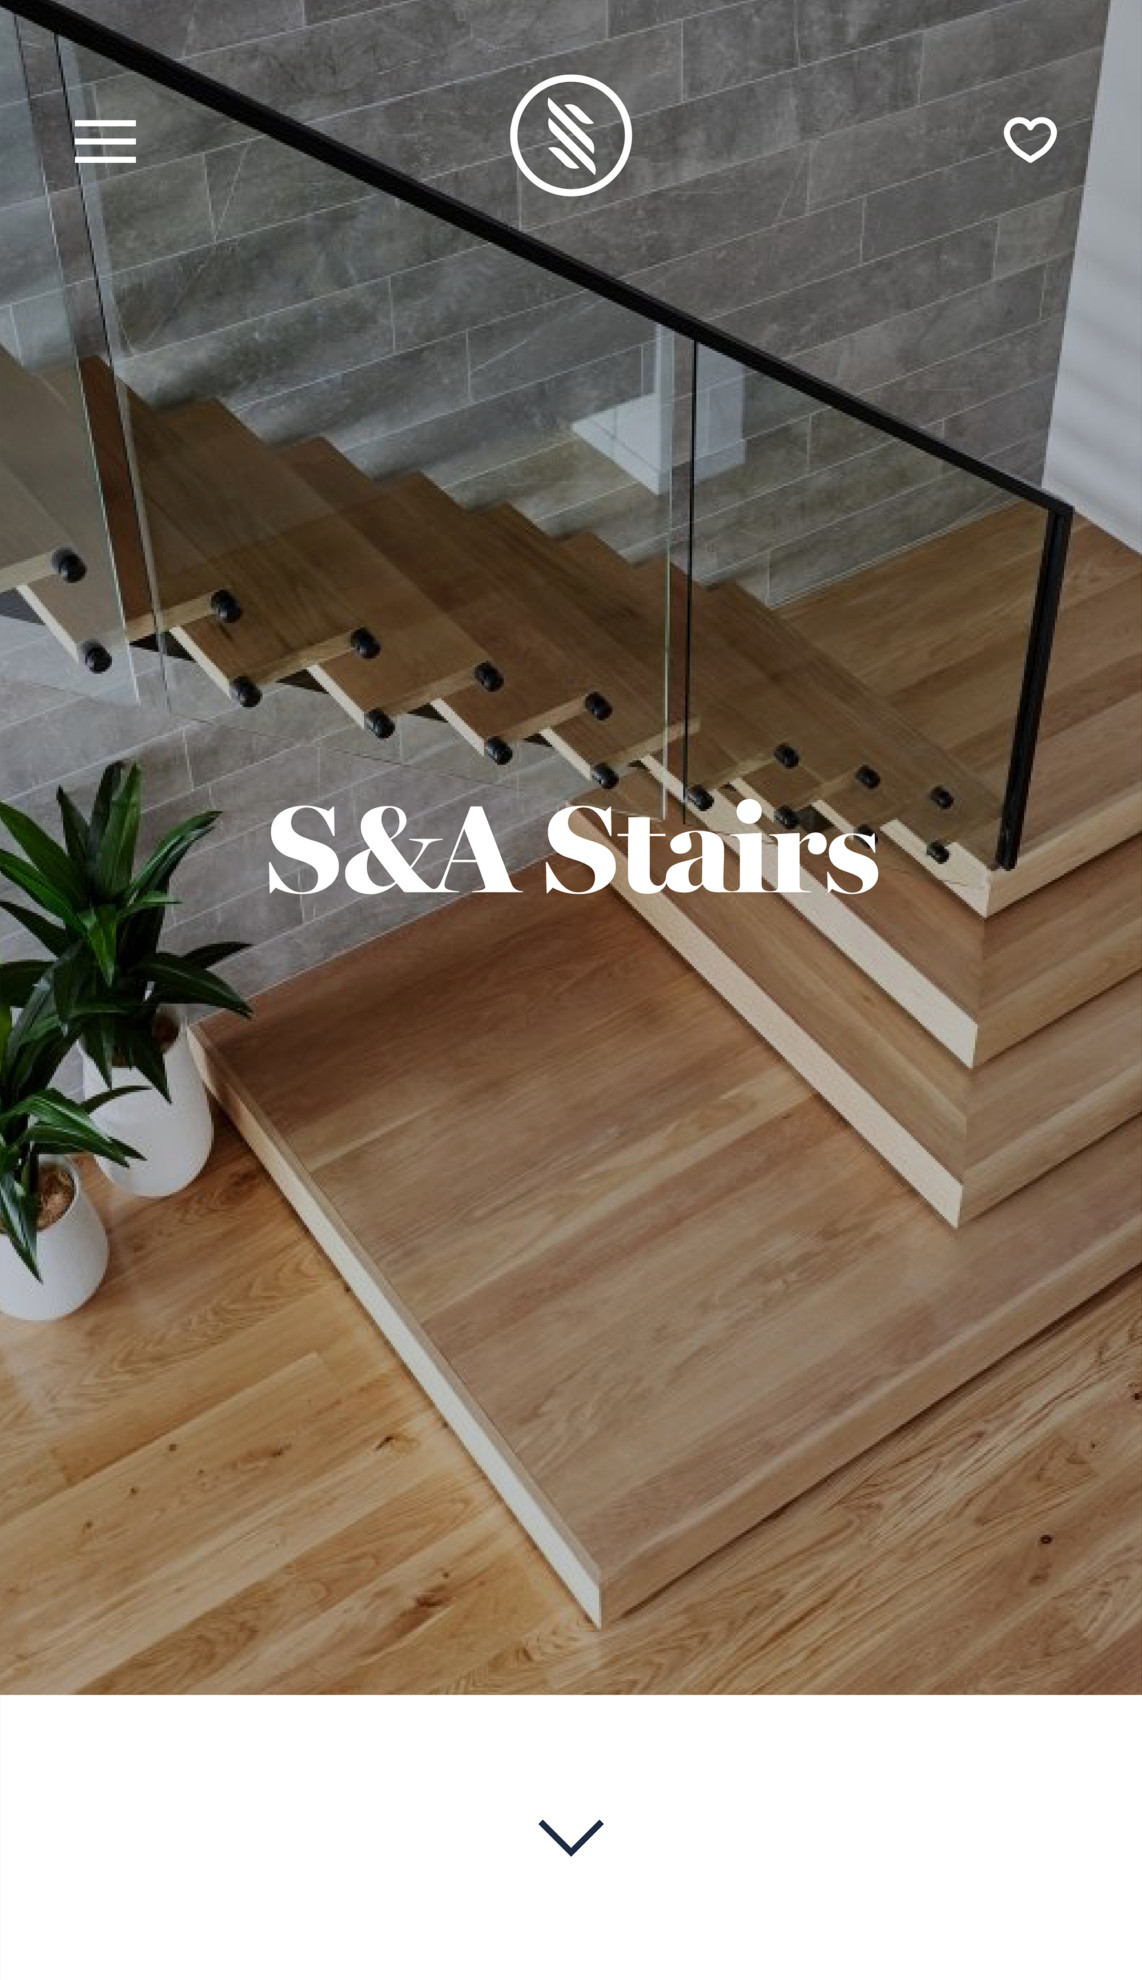 S&A Stairs - Website - Mobile